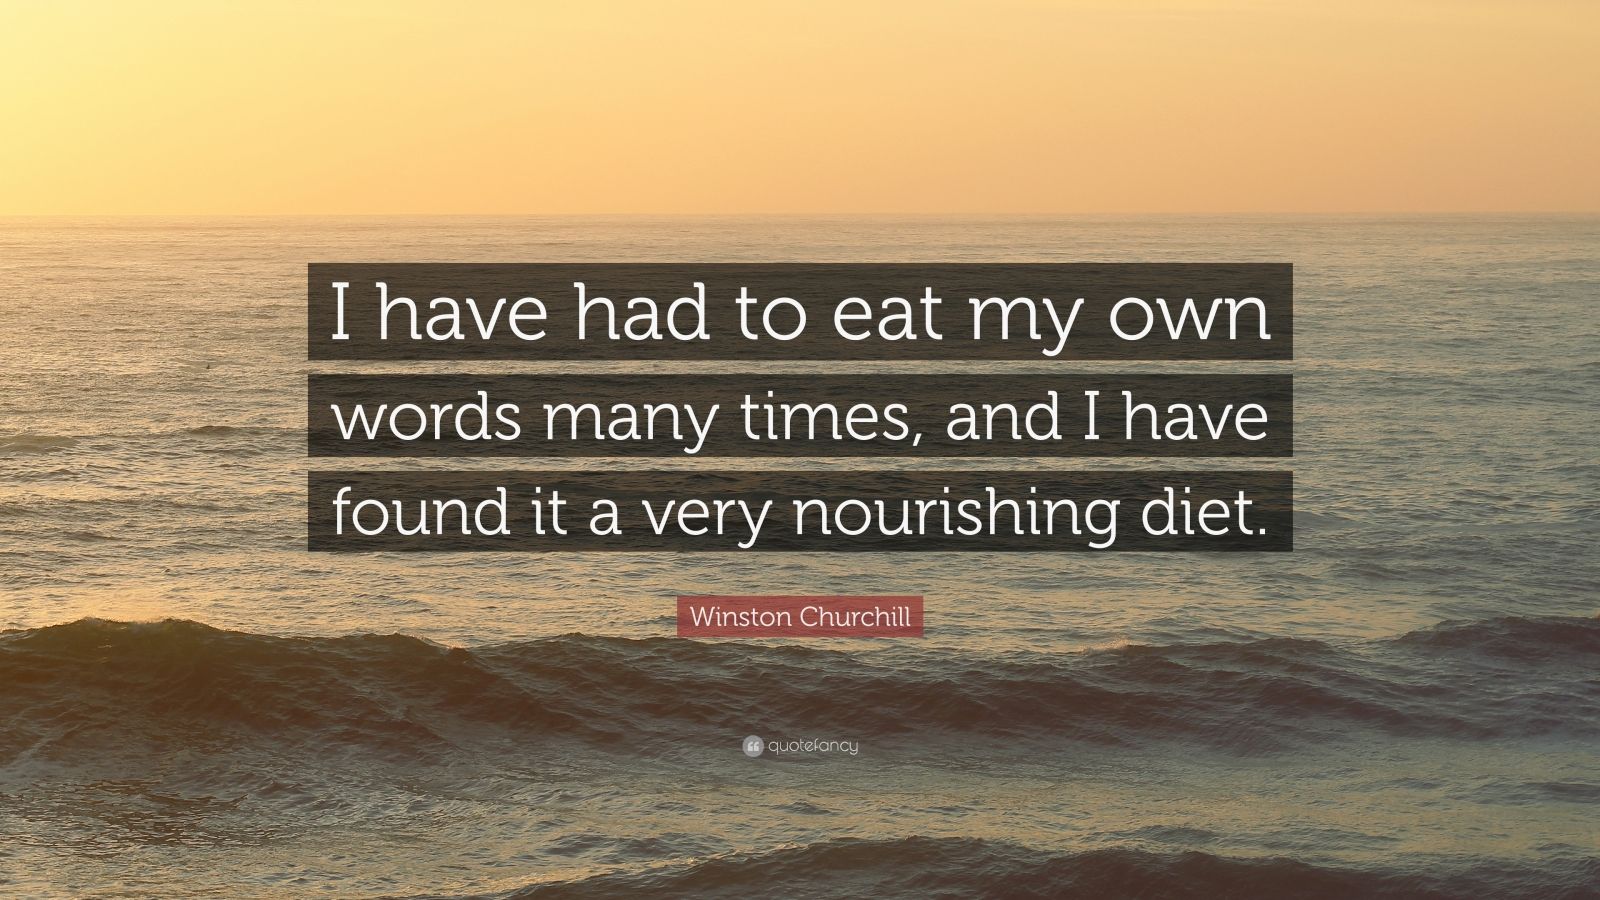 Winston Churchill Quote: “I have had to eat my own words ...